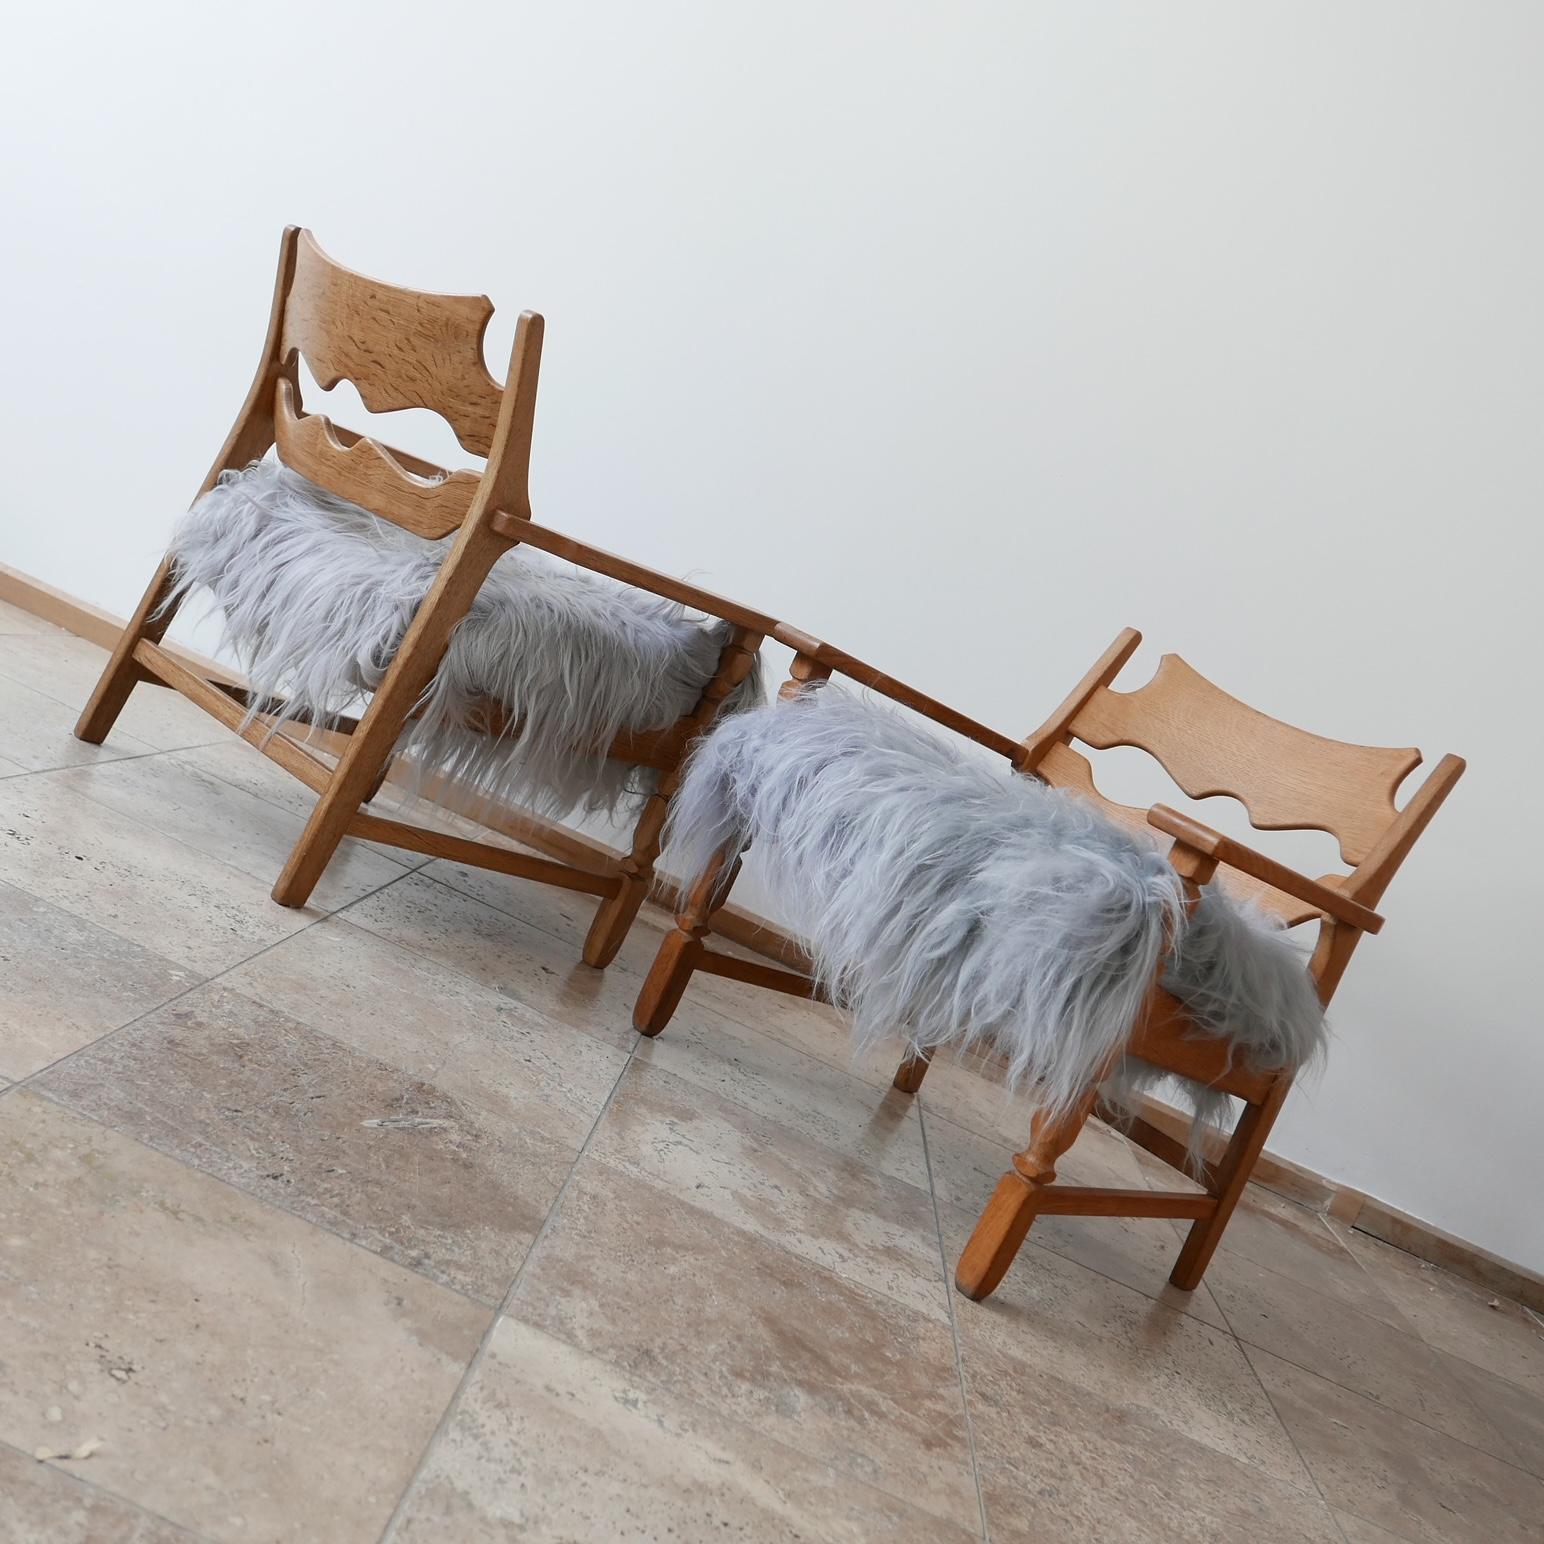 A pair of Henning (Henry) Kjaernulf armchairs.

Denmark, c1960s.

Solid oak, with new upholstered icelandic sheepskin covers.

Small tonality differences between the wood and sheepskins on the two chairs but fractional.

We may split, but priced and